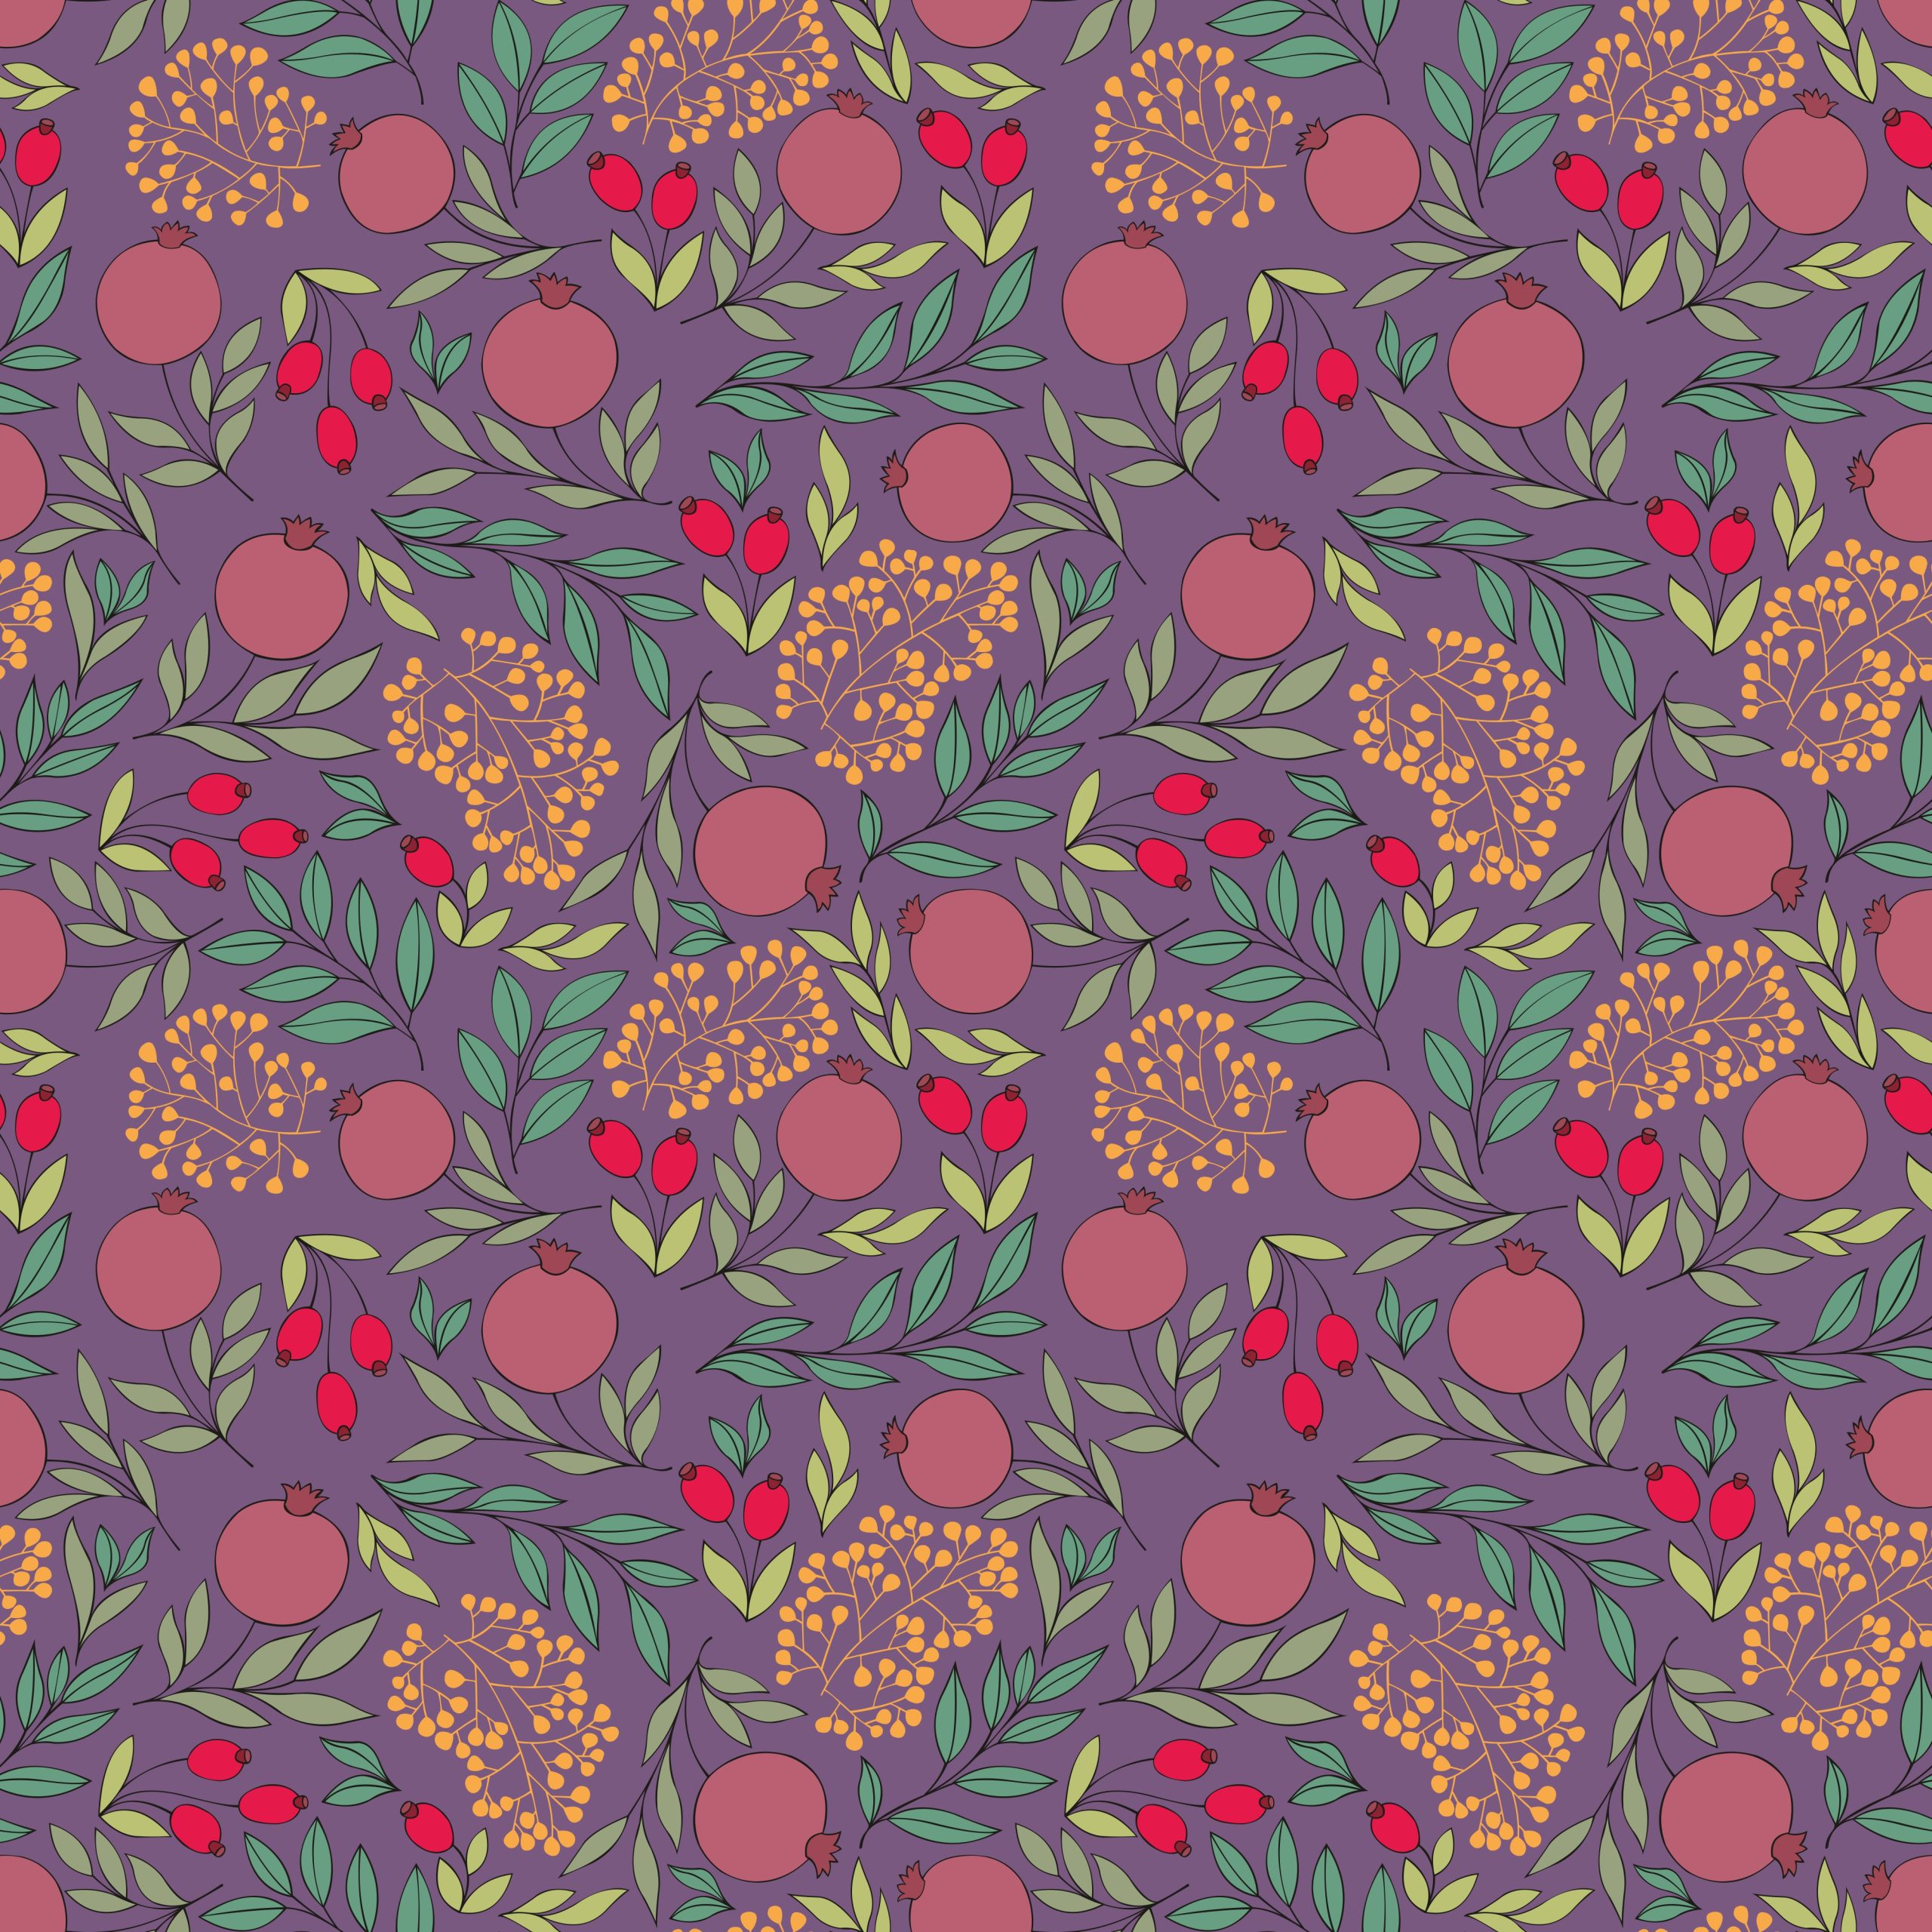 Pomegranate. Vector seamless background for design and decoration of textiles, surfaces and wrapping paper